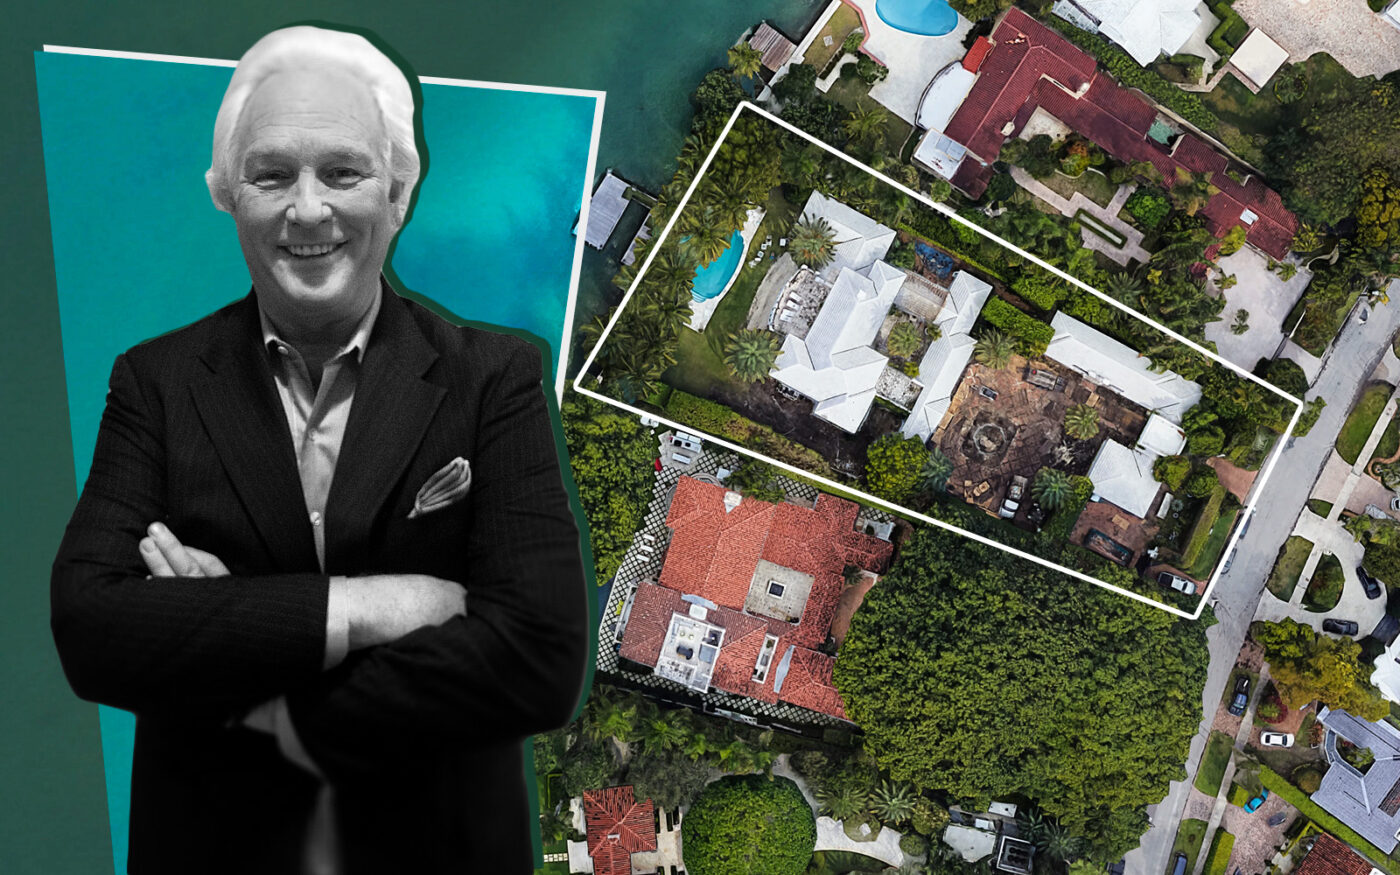 Christopher Burch Lists Waterfront Miami Beach Manse for $49M